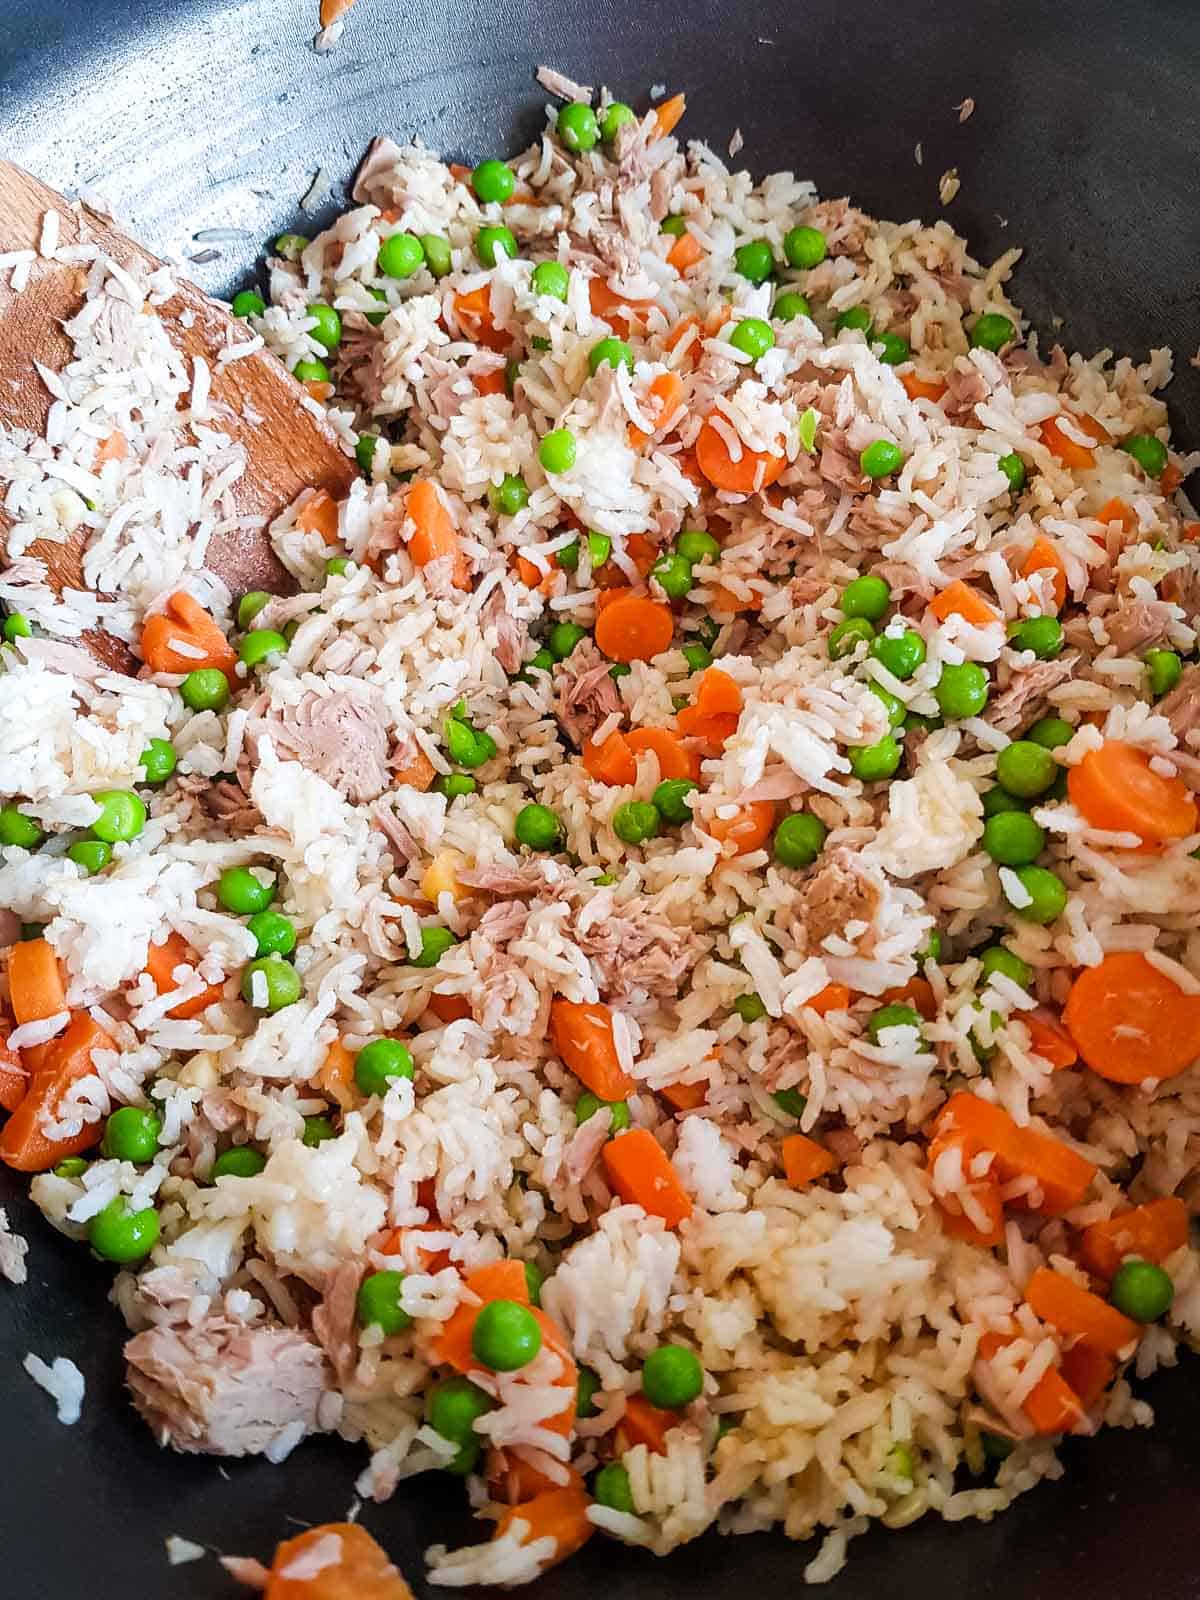 Fried rice with carrots, peas and tuna in a wok.